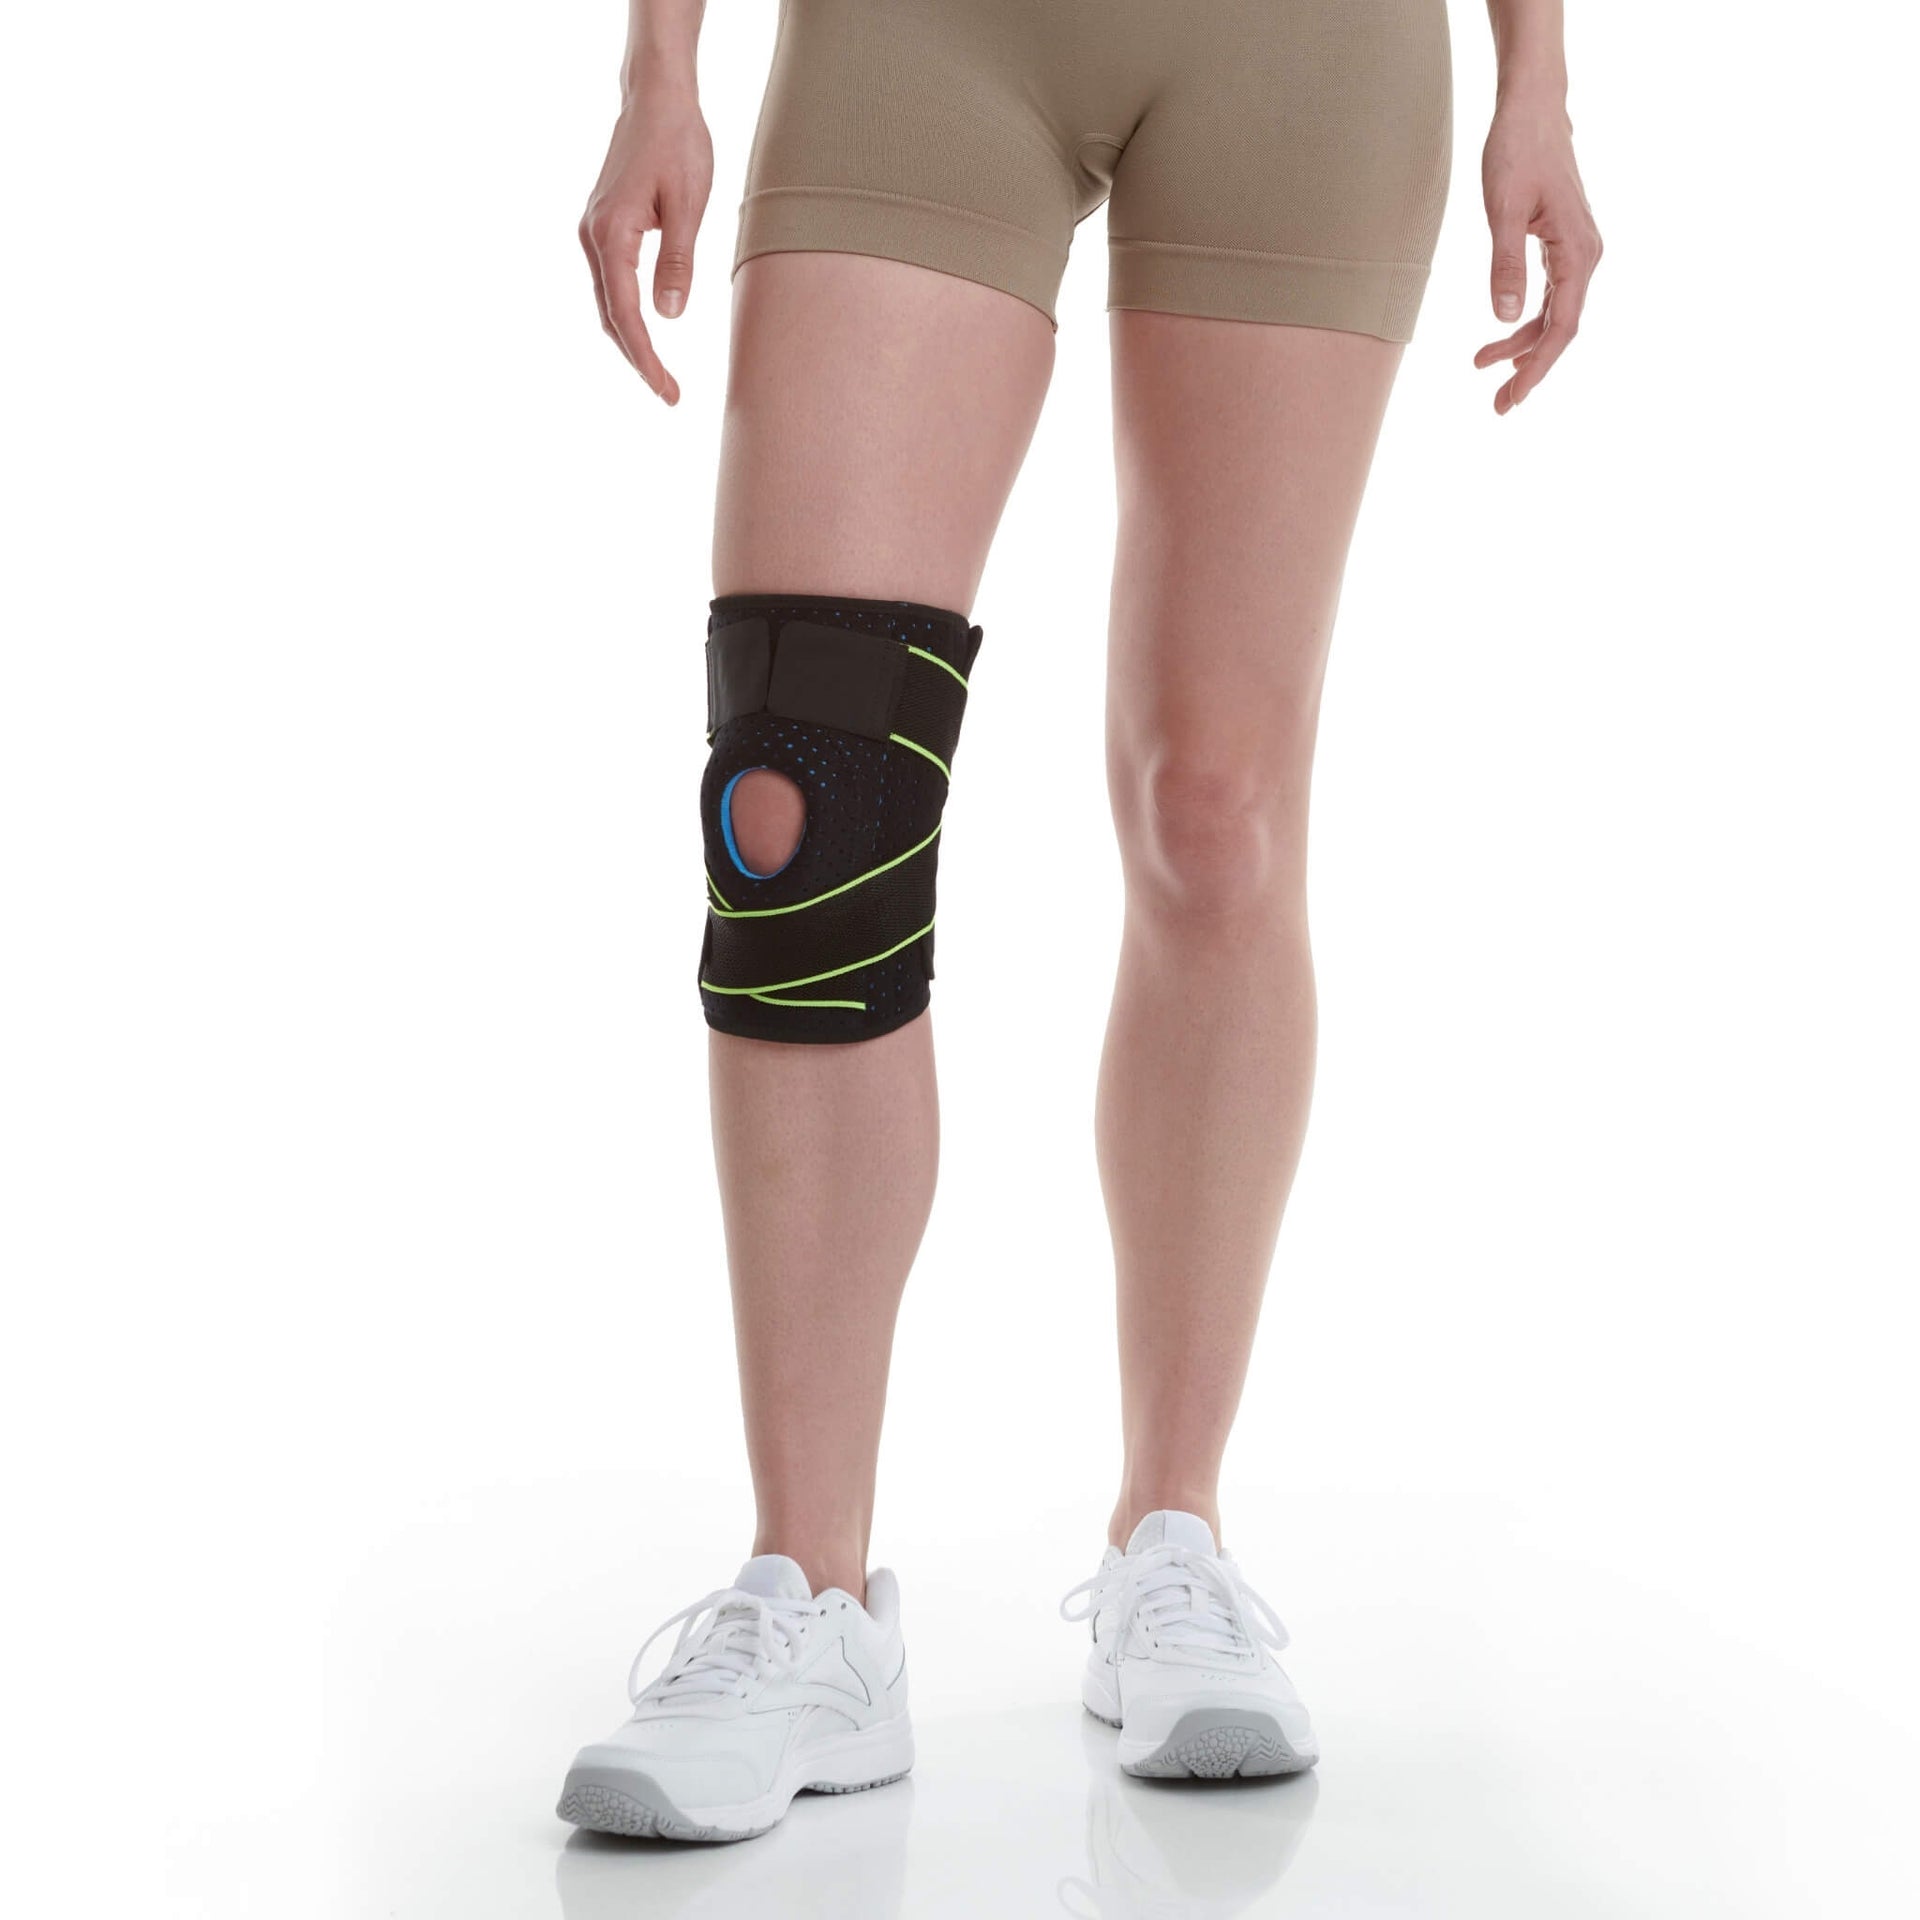 4 Sizes Available - Plus Size Knee Braces with Side Stabilizers & Patella  Gel Pads,Knee Support for Knee Joint Recovery or Injury Prevention for Man  and Women 